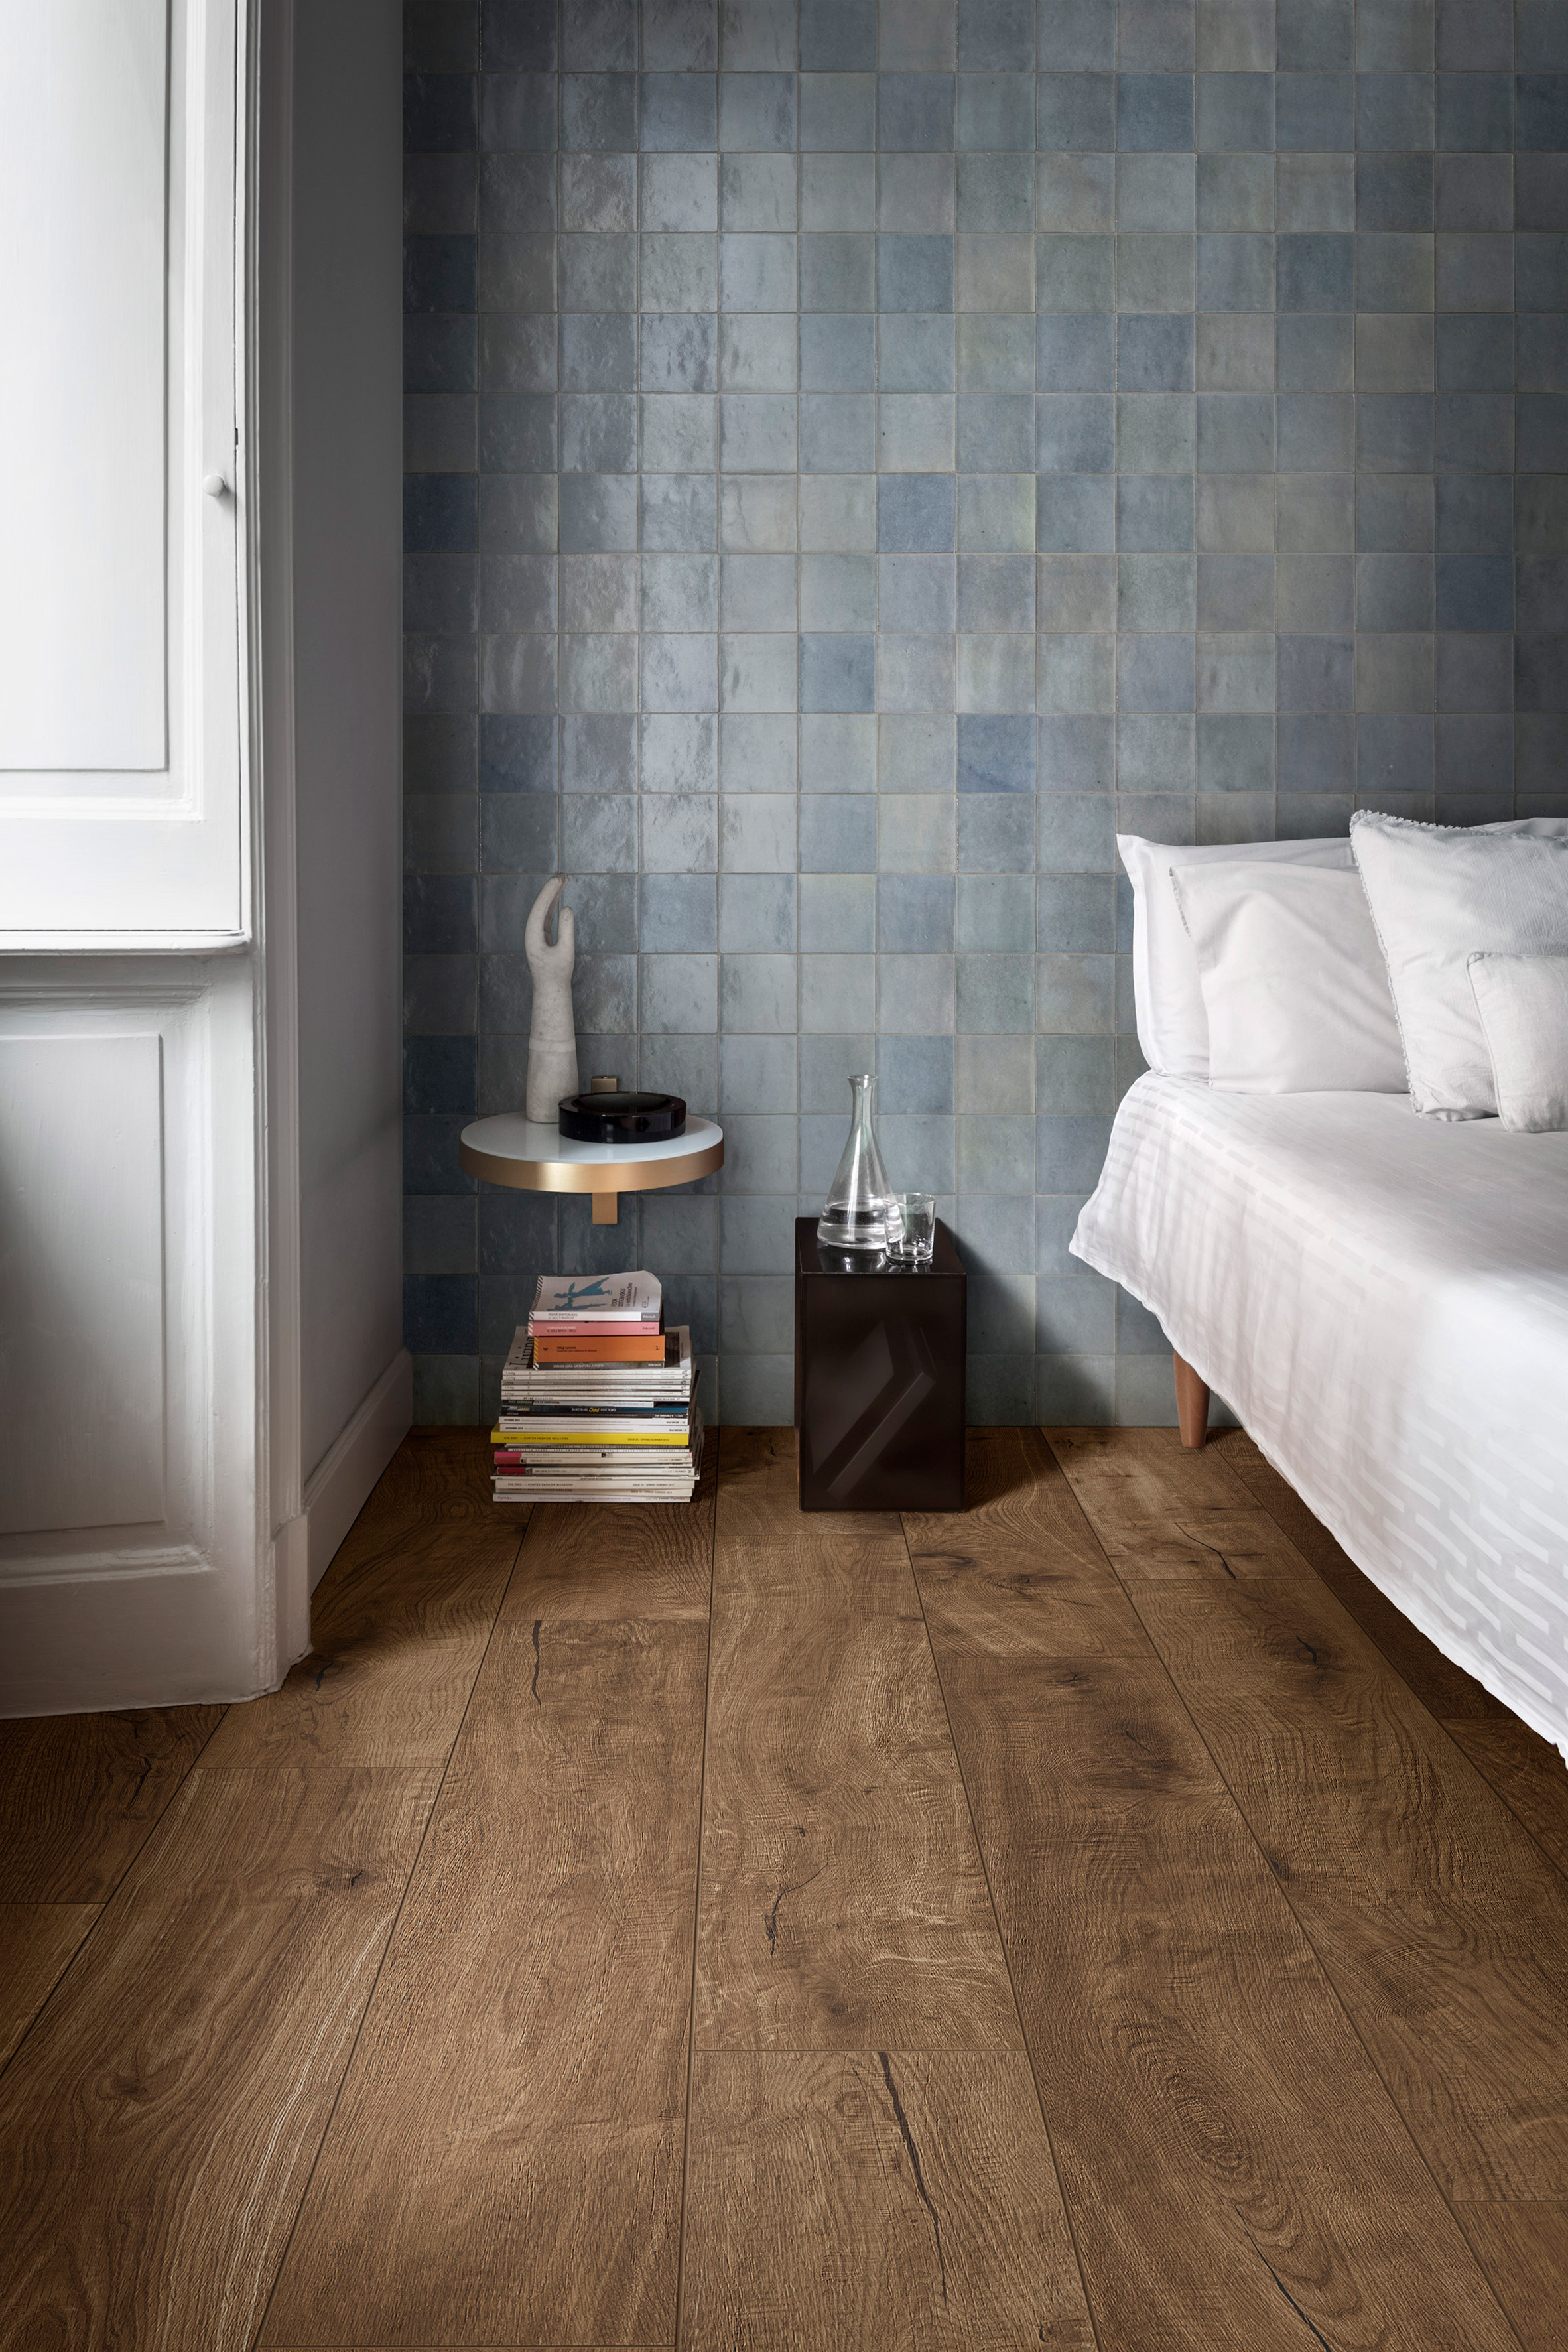 Marazzi updates its Crogiolo tile collection with designs that celebrate flaws